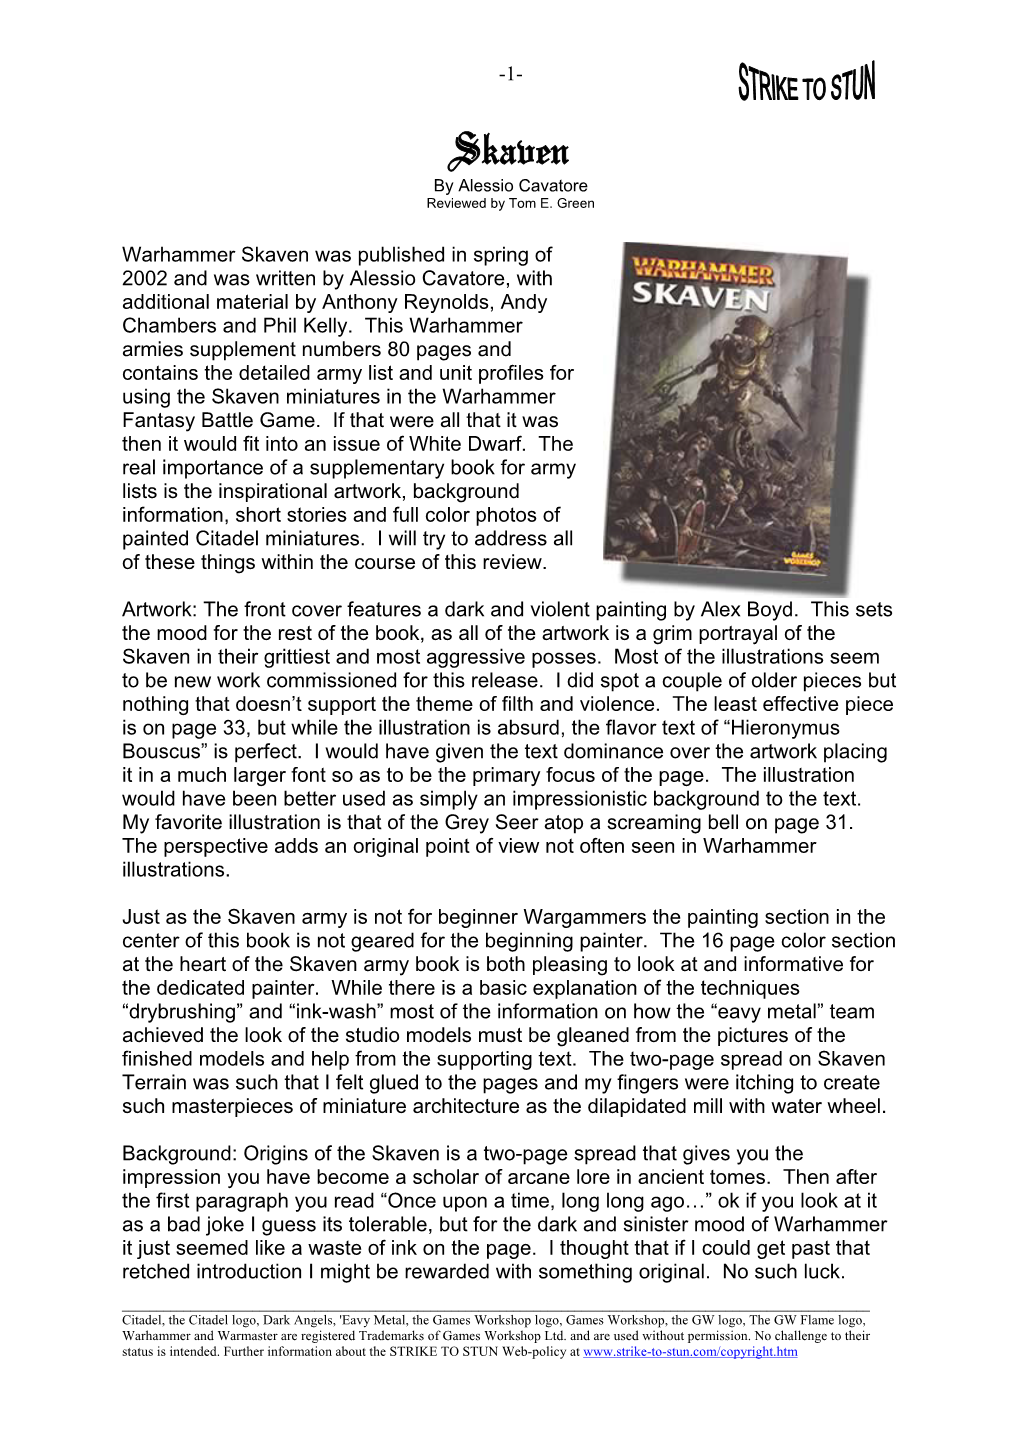 Skaven by Alessio Cavatore Reviewed by Tom E